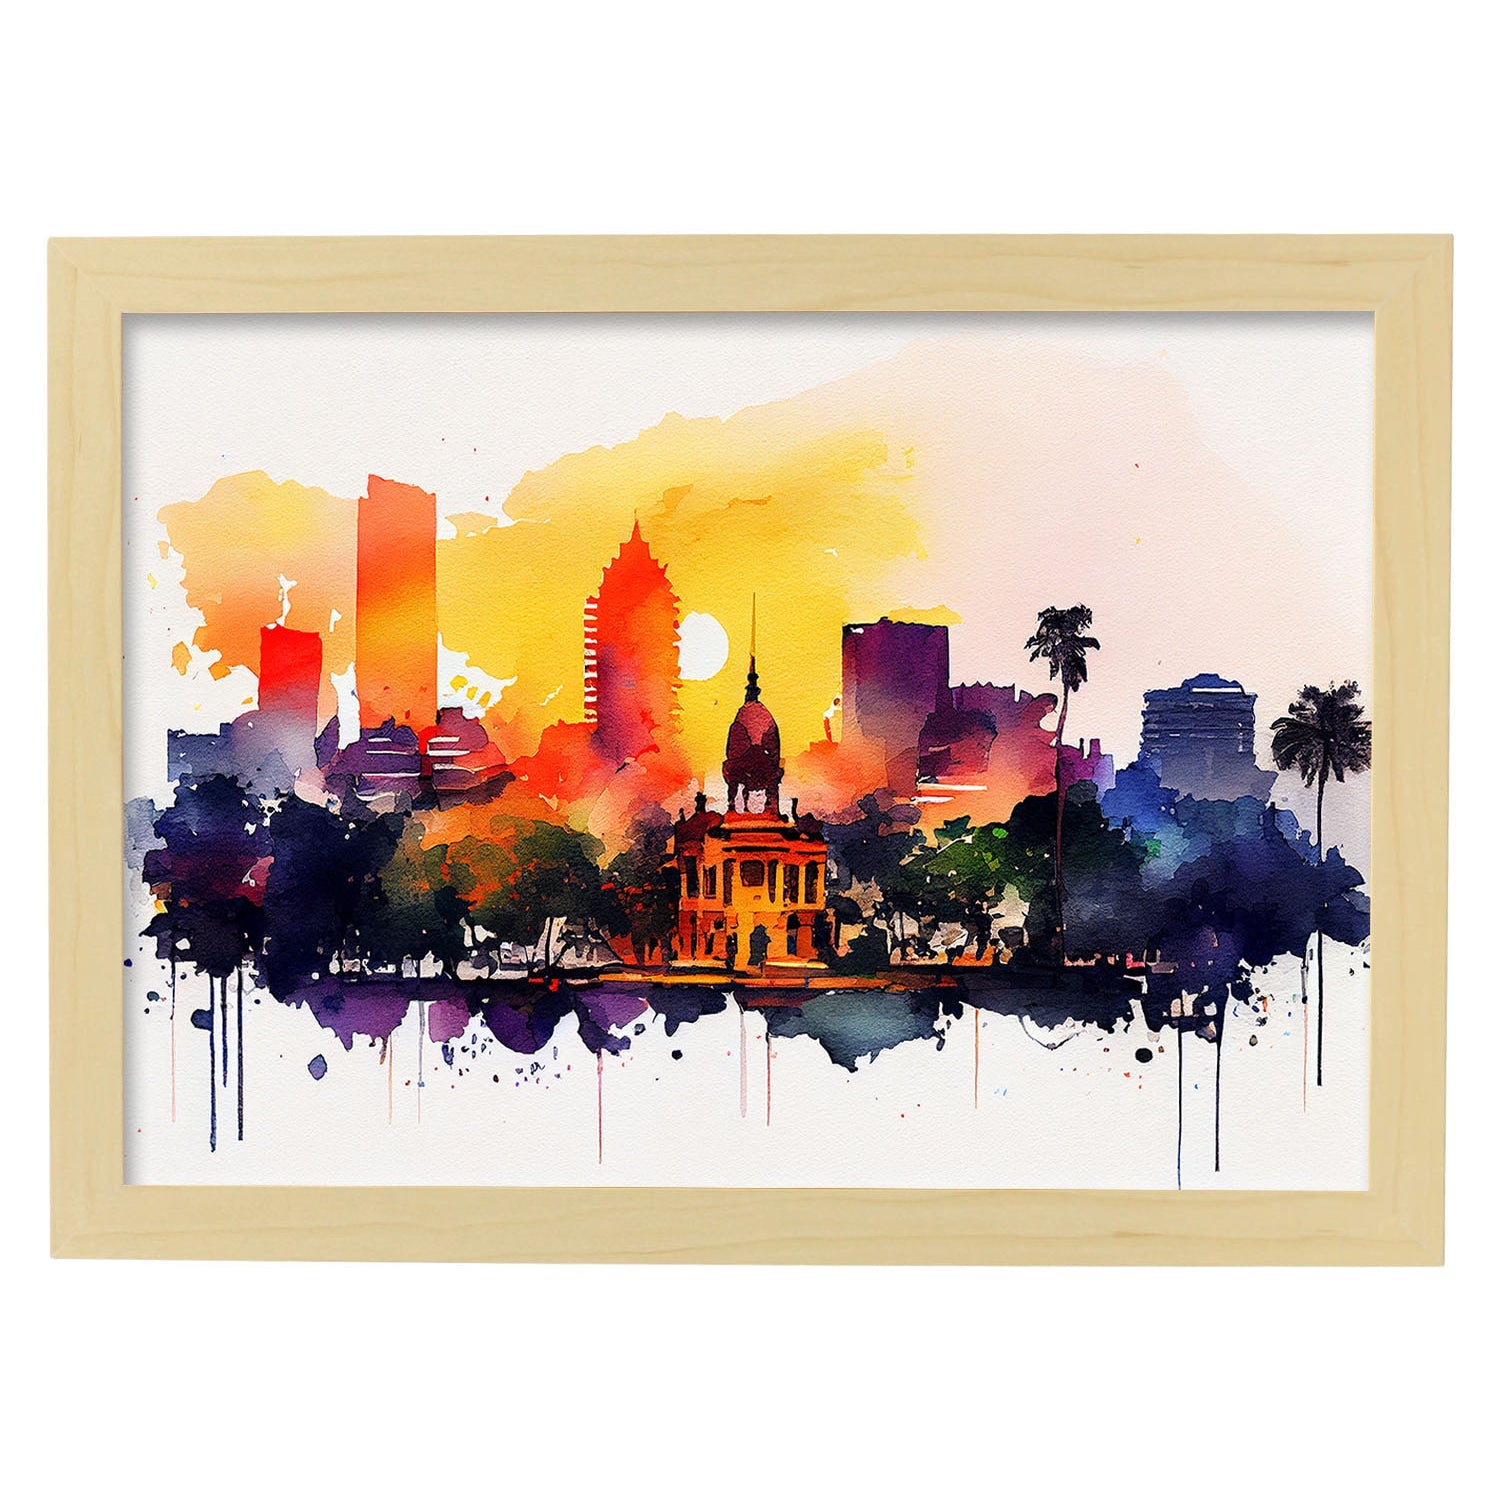 Nacnic watercolor of a skyline of the city of Hanoi_1. Aesthetic Wall Art Prints for Bedroom or Living Room Design.-Artwork-Nacnic-A4-Marco Madera Clara-Nacnic Estudio SL